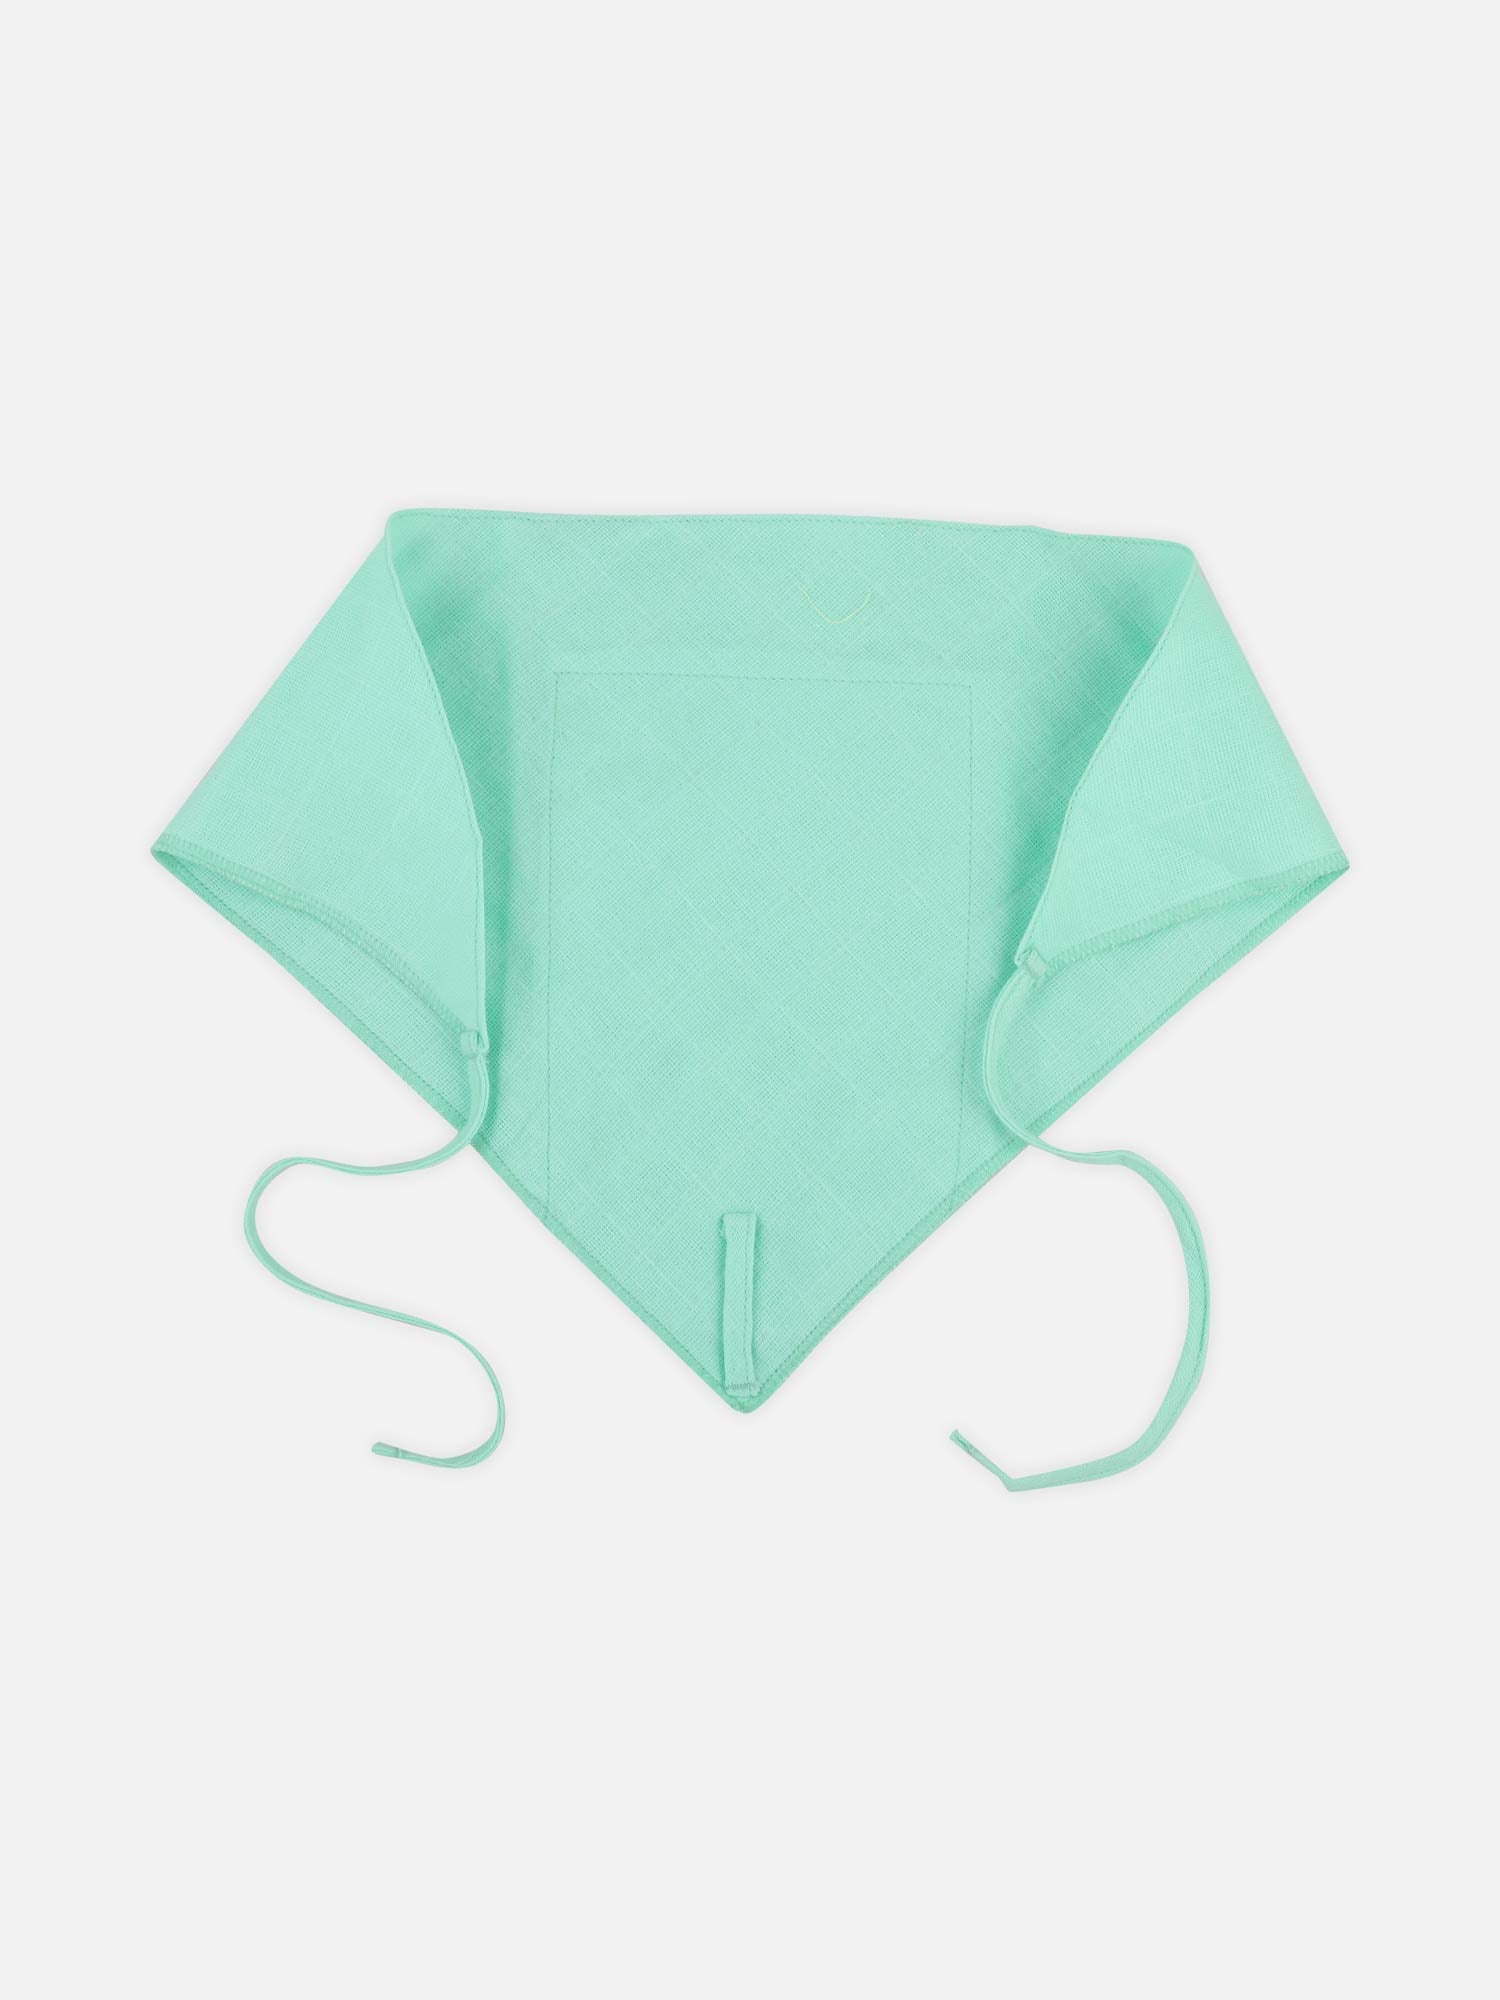 Oh Baby Plain Triangle Nappies Green - Trpl